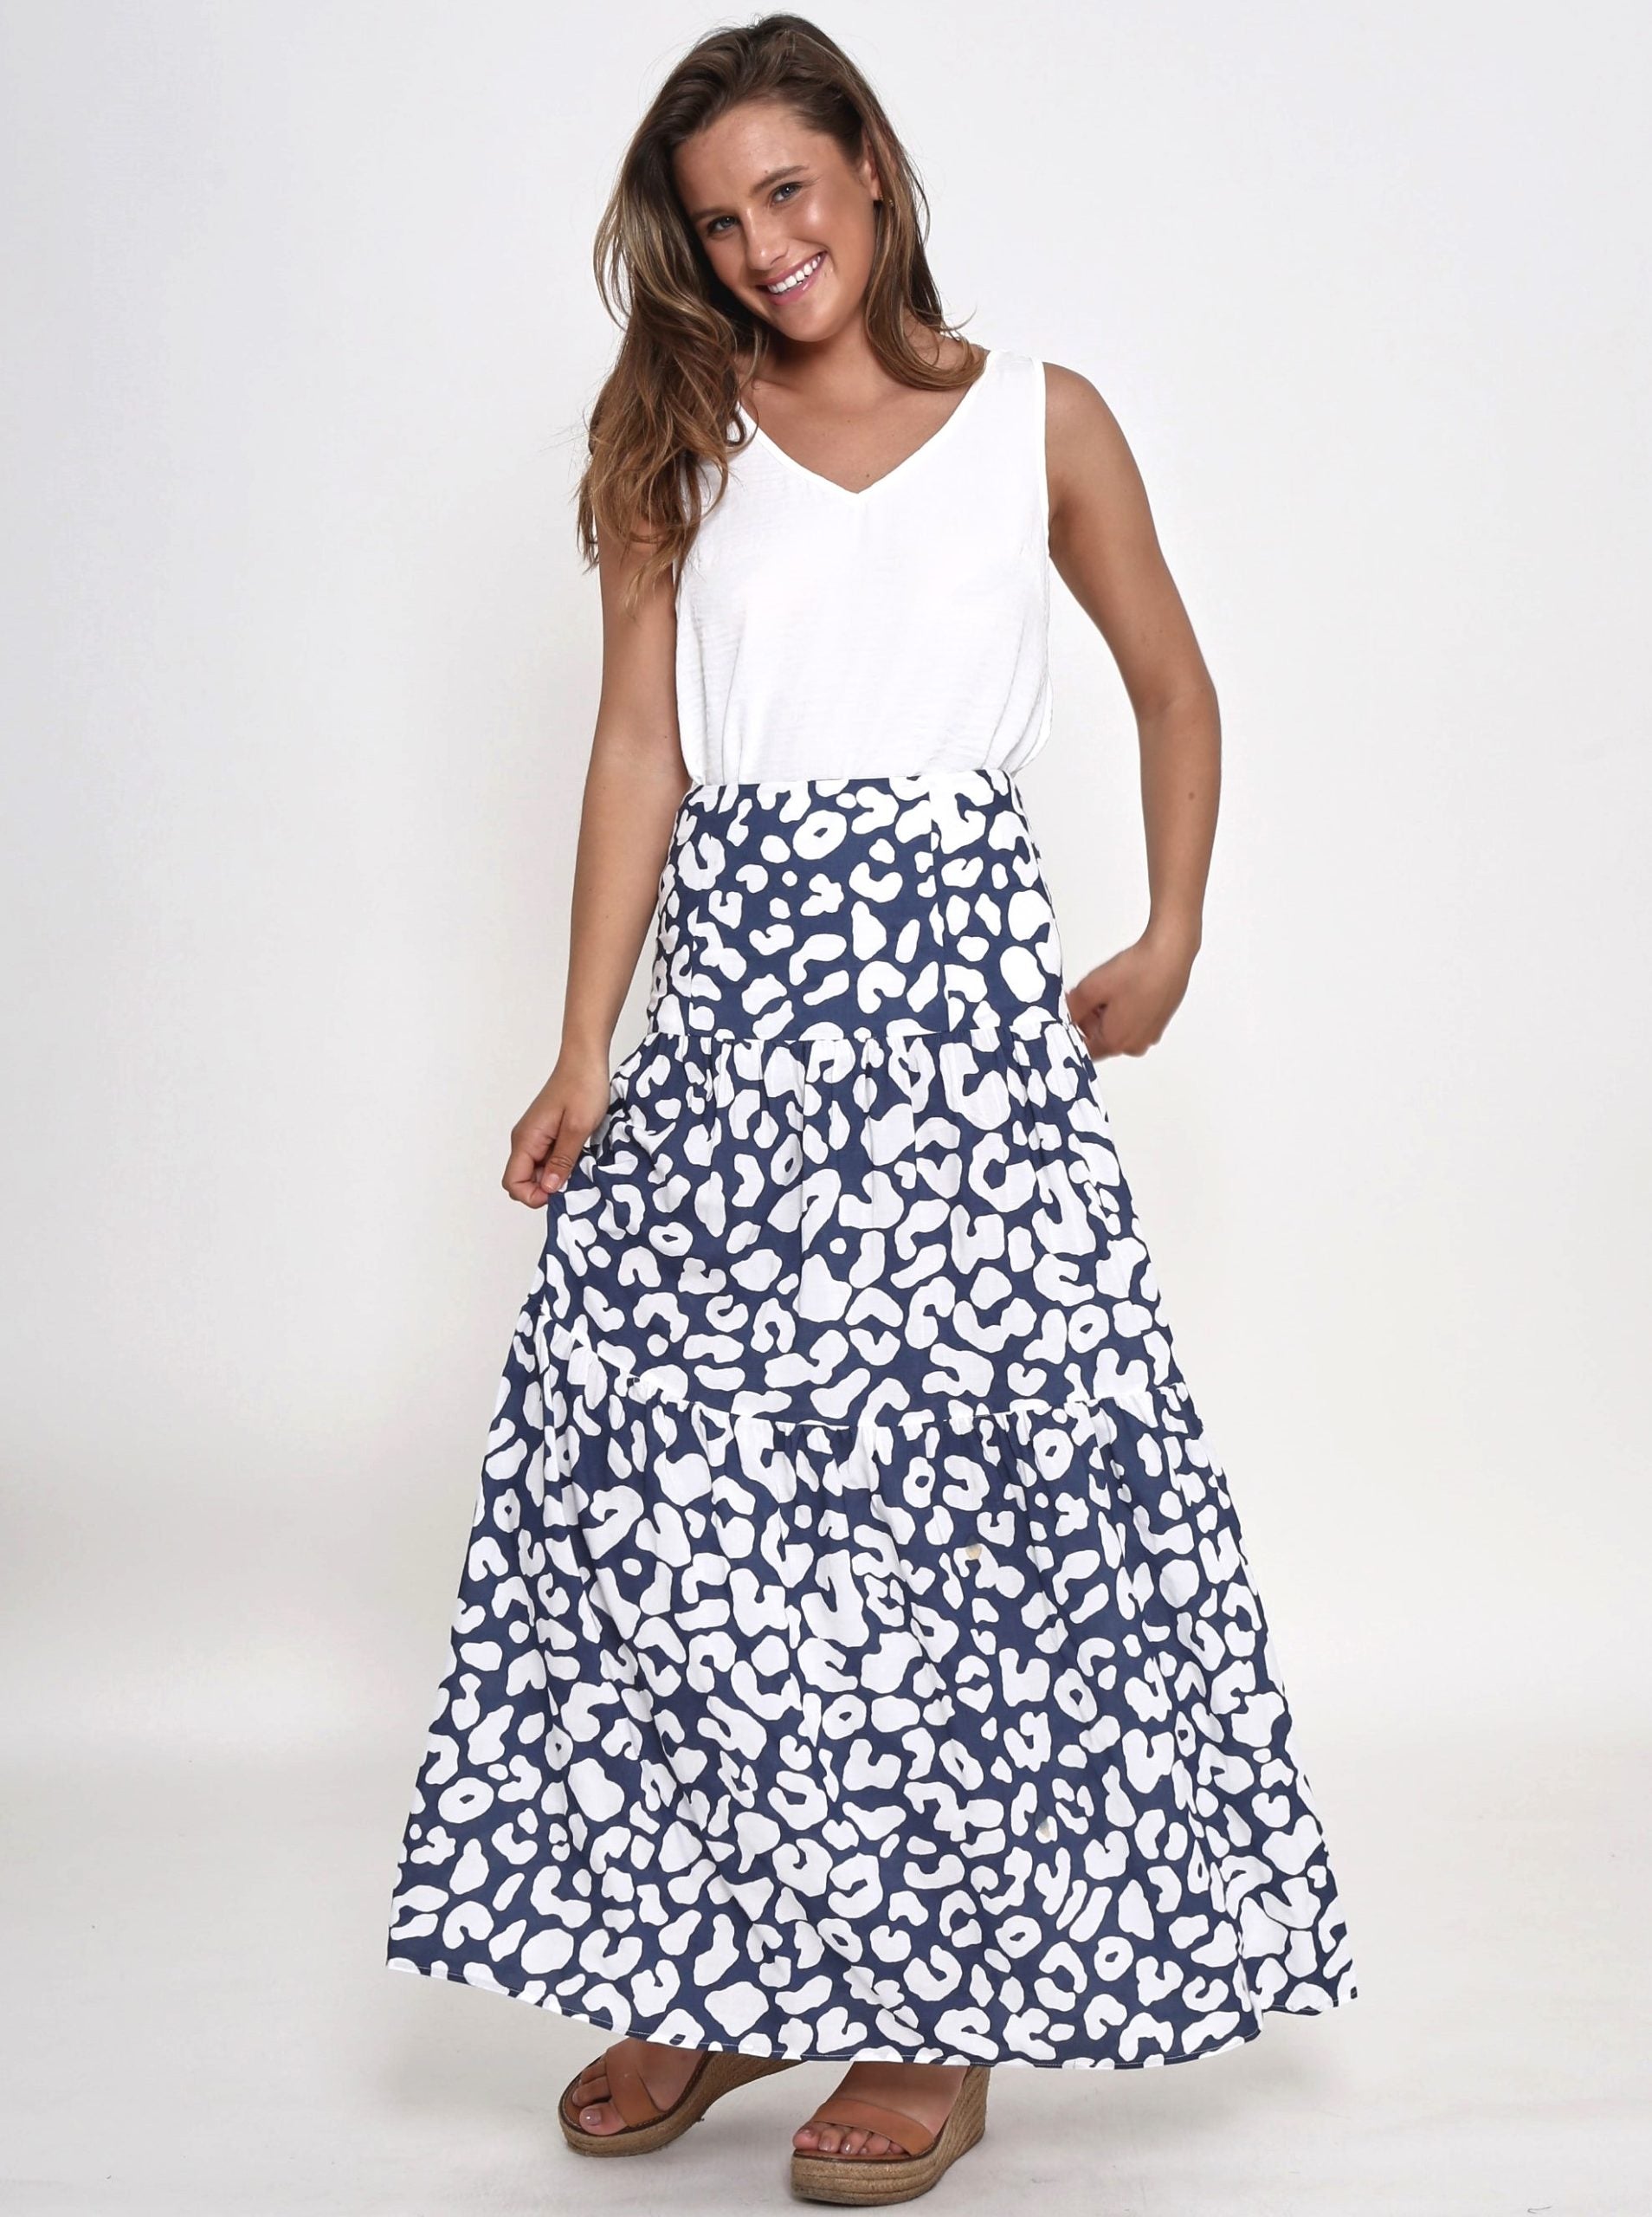 Unleash your inner fashionista with our navy leopard print cotton long skirt. Stylish, versatile, and comfortable. Grab yours now before it&#39;s gone!